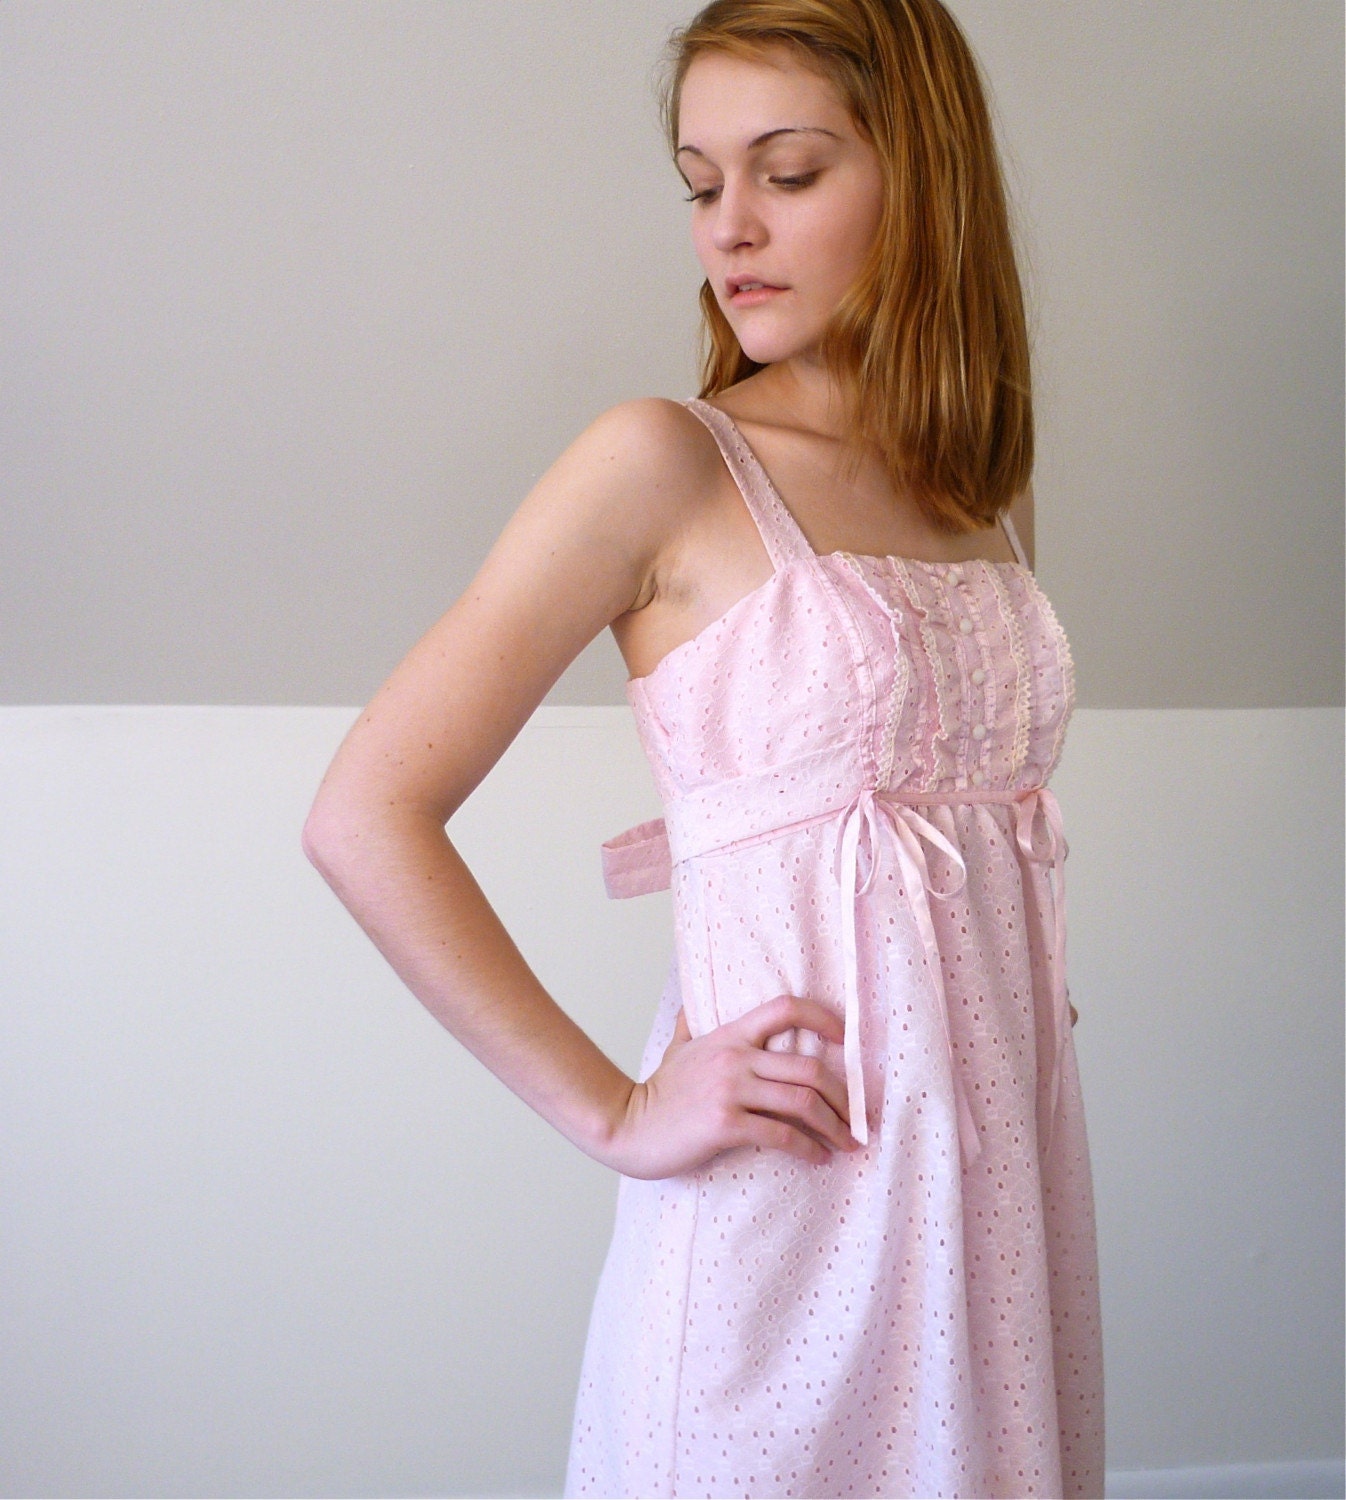 The Pink Eyelet and Lace Dress